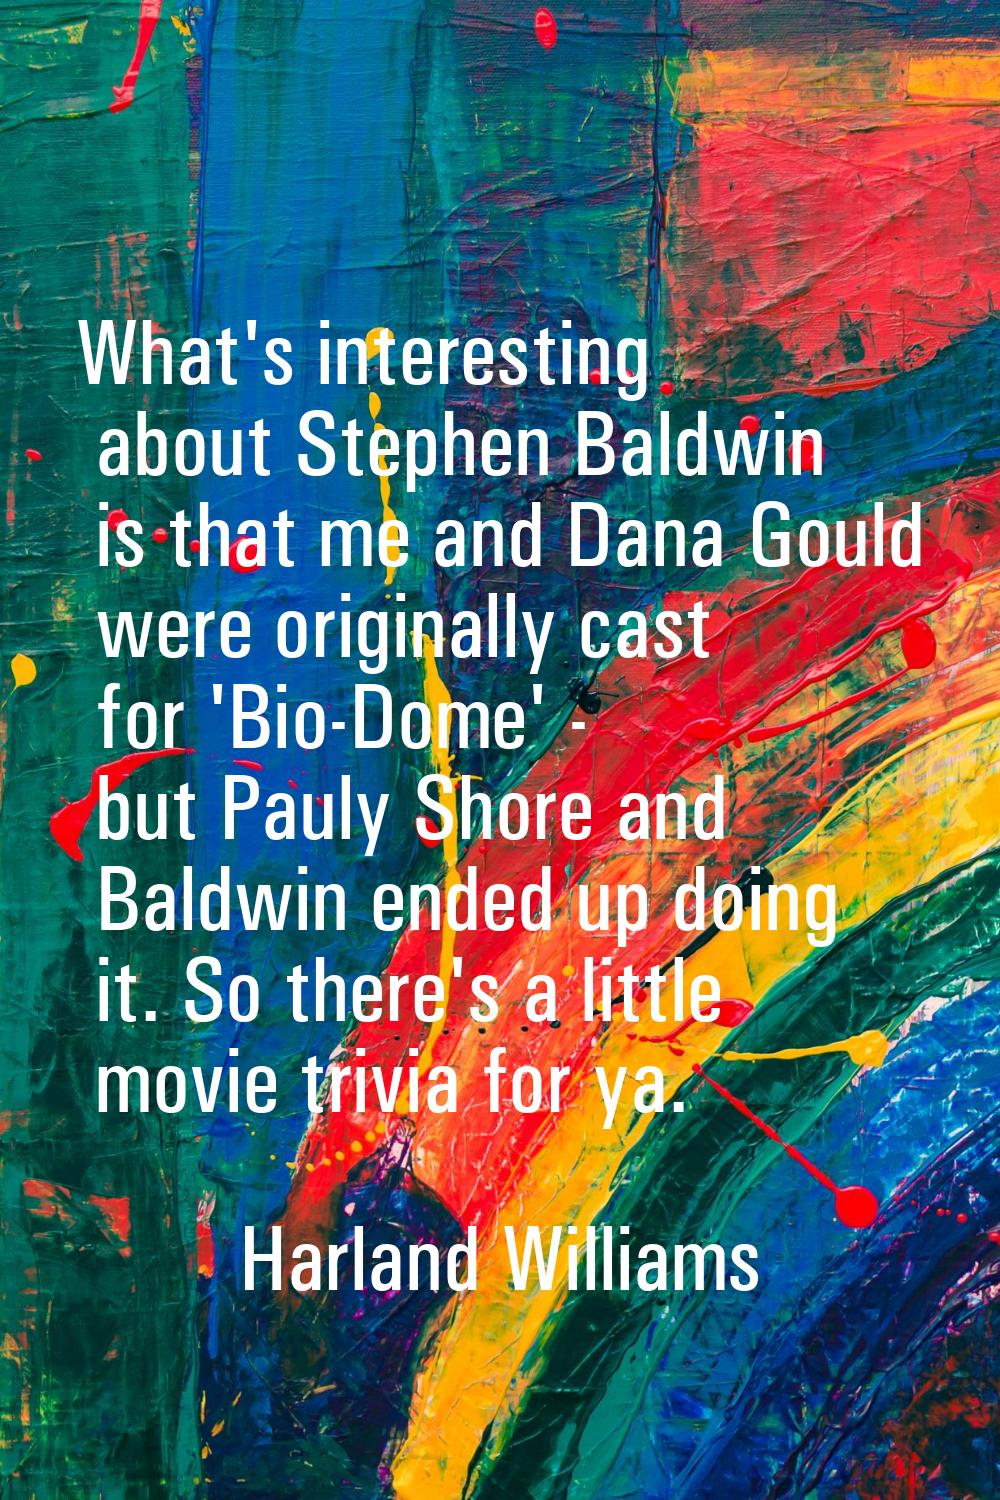 What's interesting about Stephen Baldwin is that me and Dana Gould were originally cast for 'Bio-Do